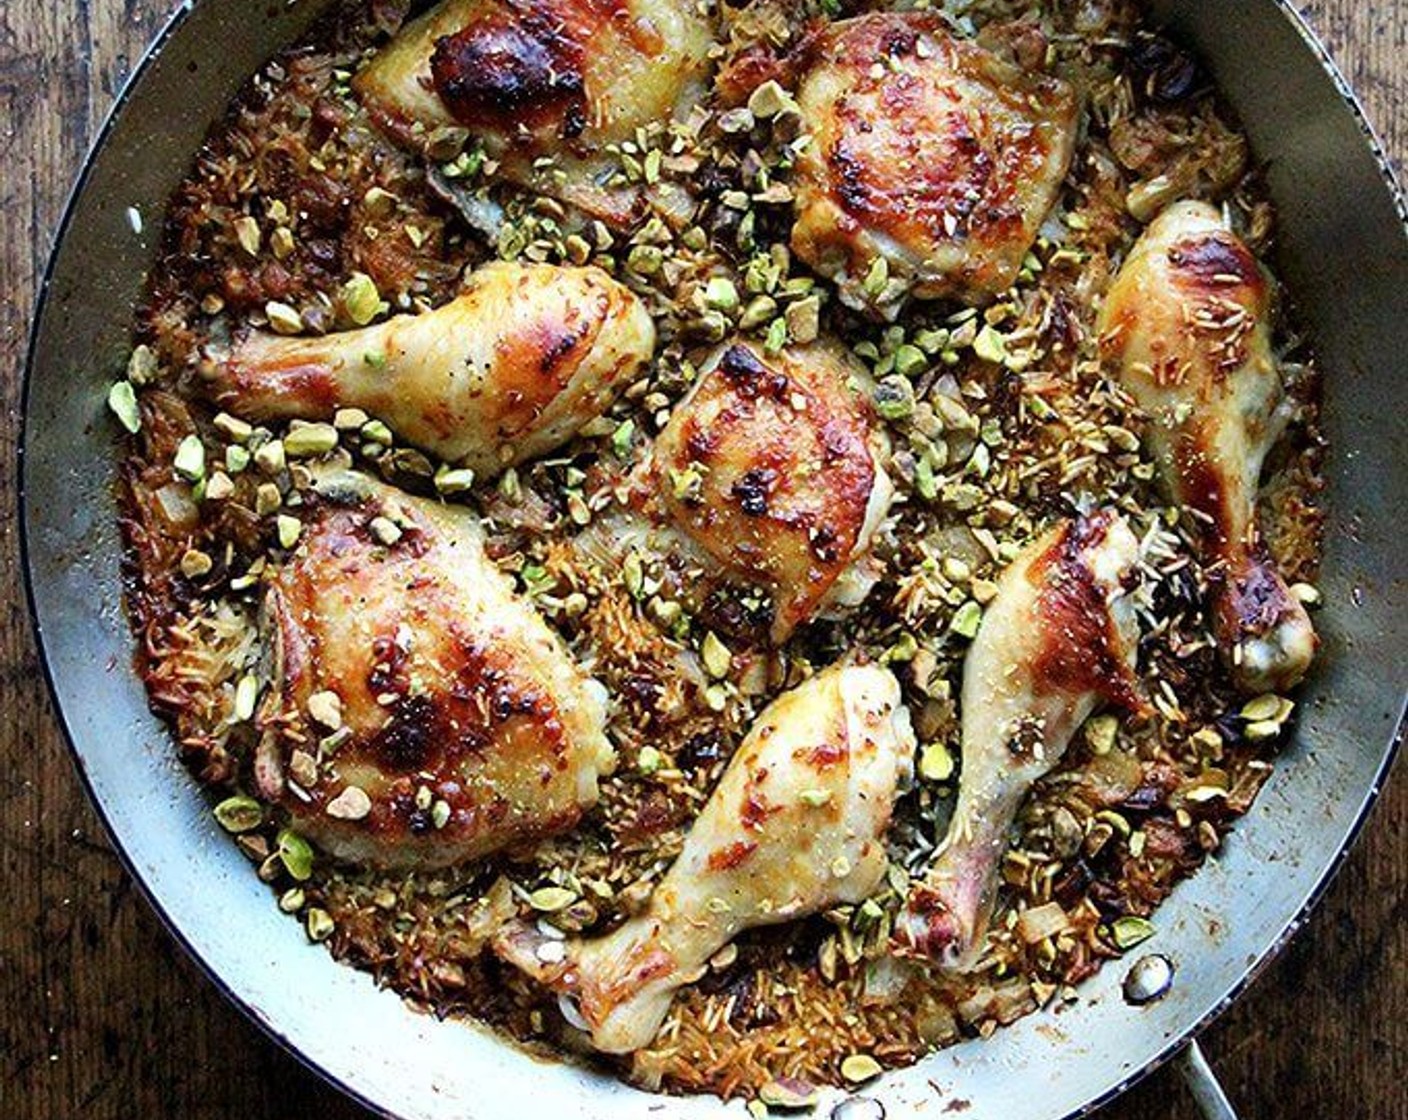 Moroccan-Spiced Chicken and Rice with Dates and Pistachios